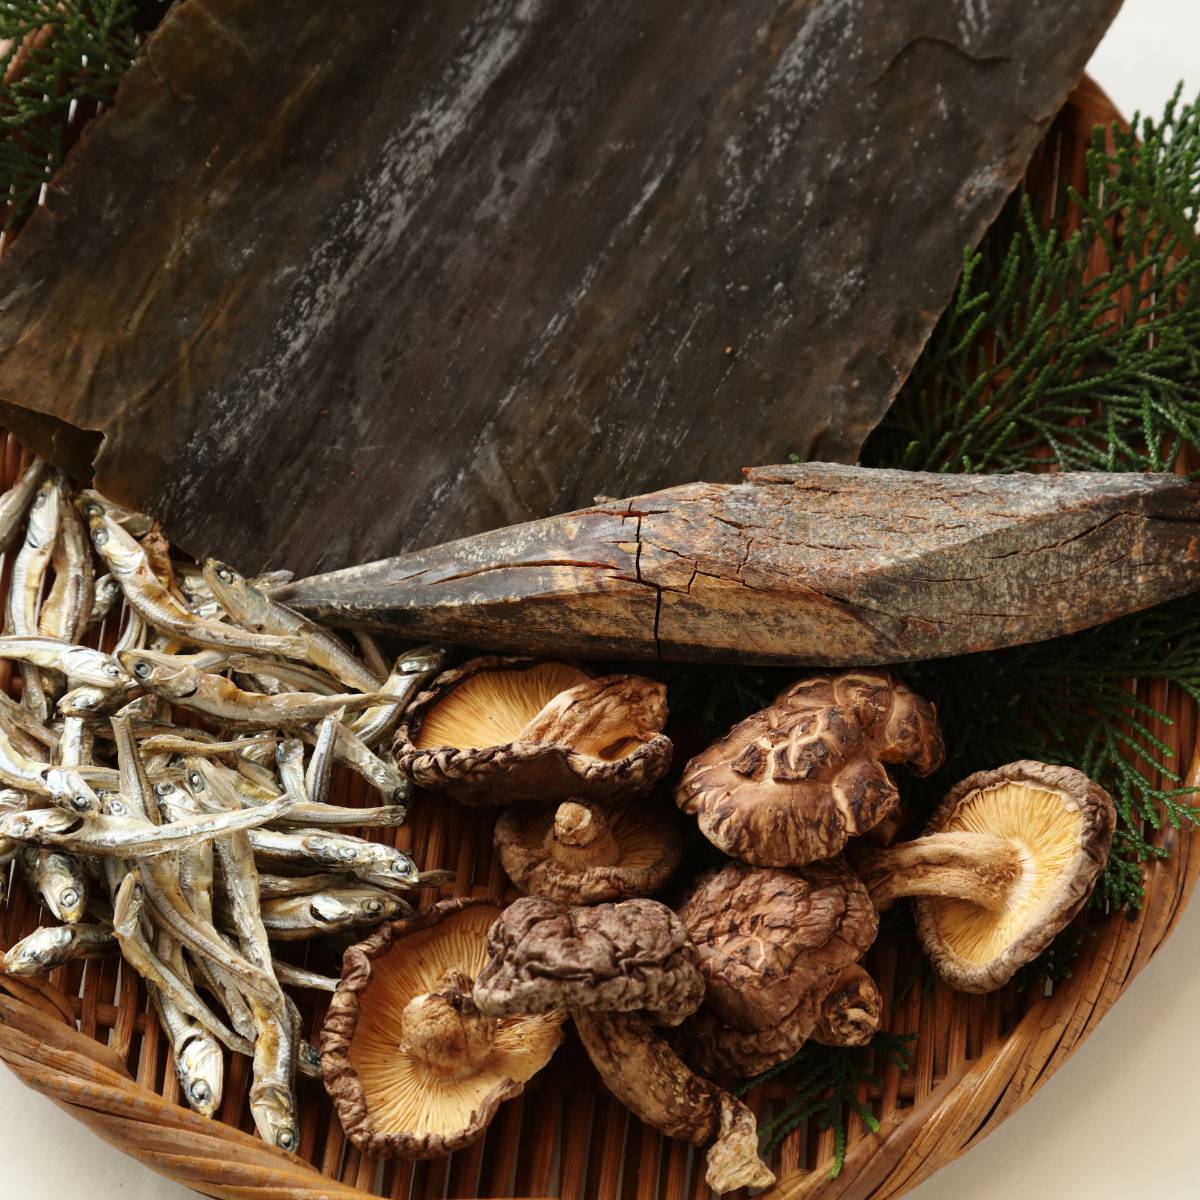 Natural ingredients such as dried anchovies, shiitake mushroom and kelp to create dashi